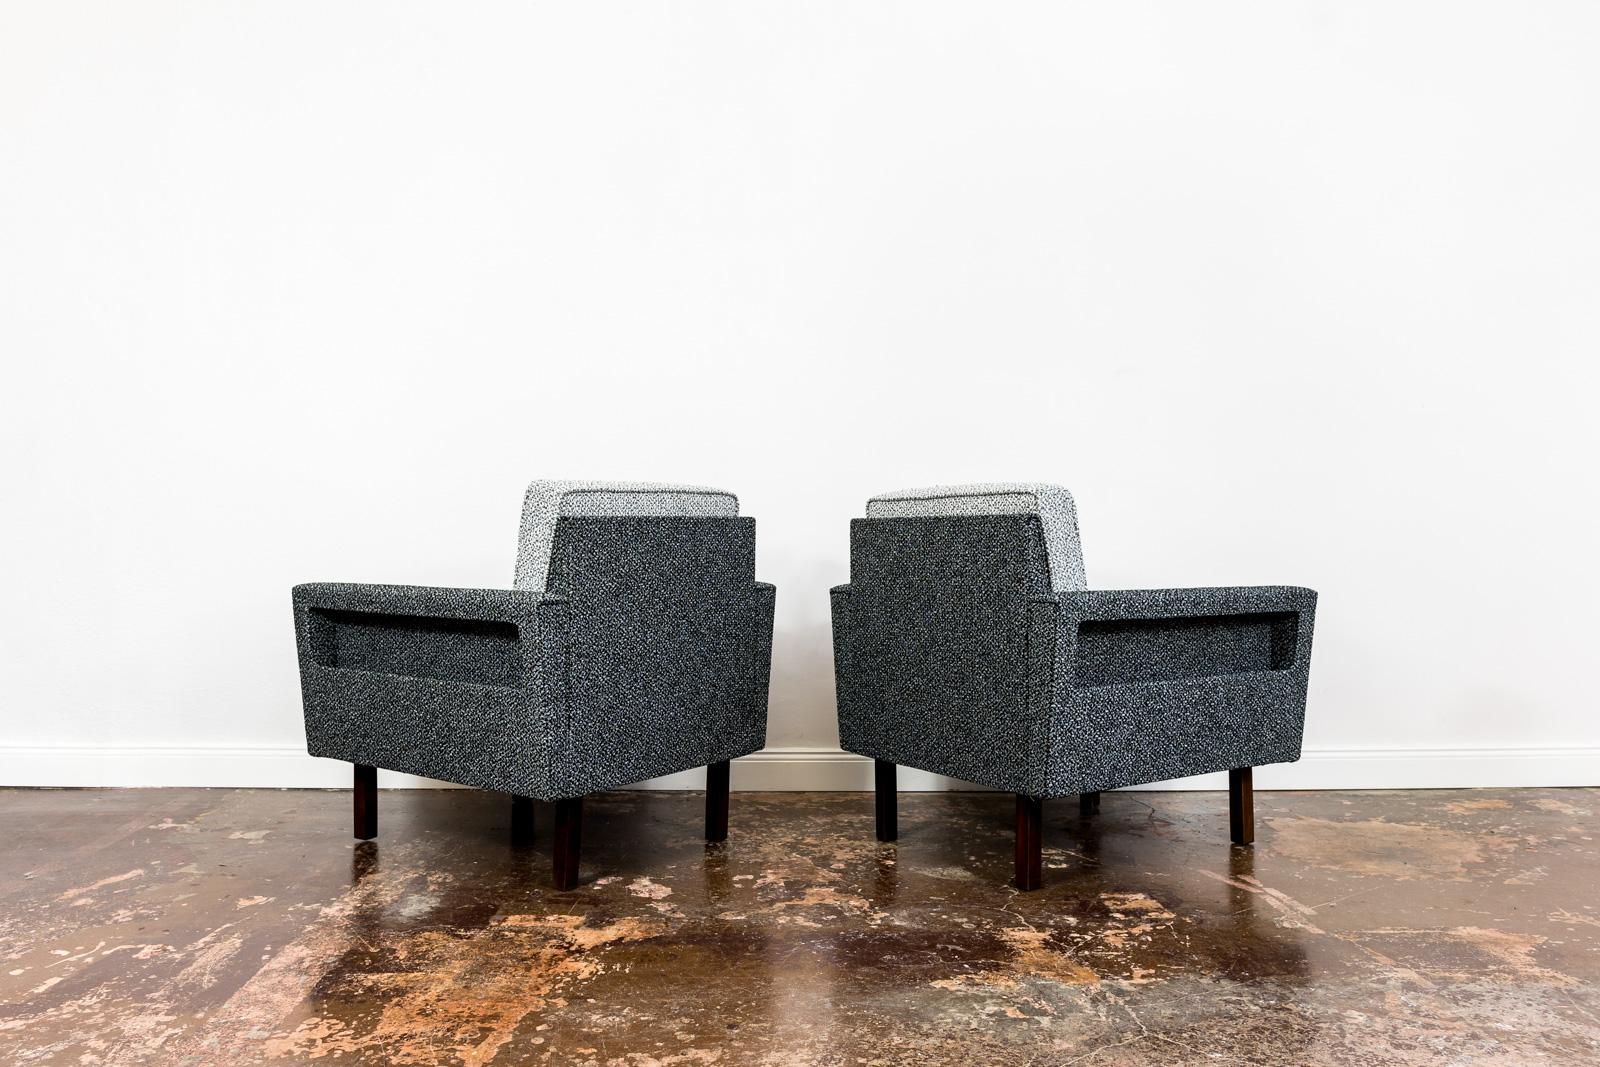 Fabric Pair Of Geometric Club Chairs, 1970s, Poland. For Sale